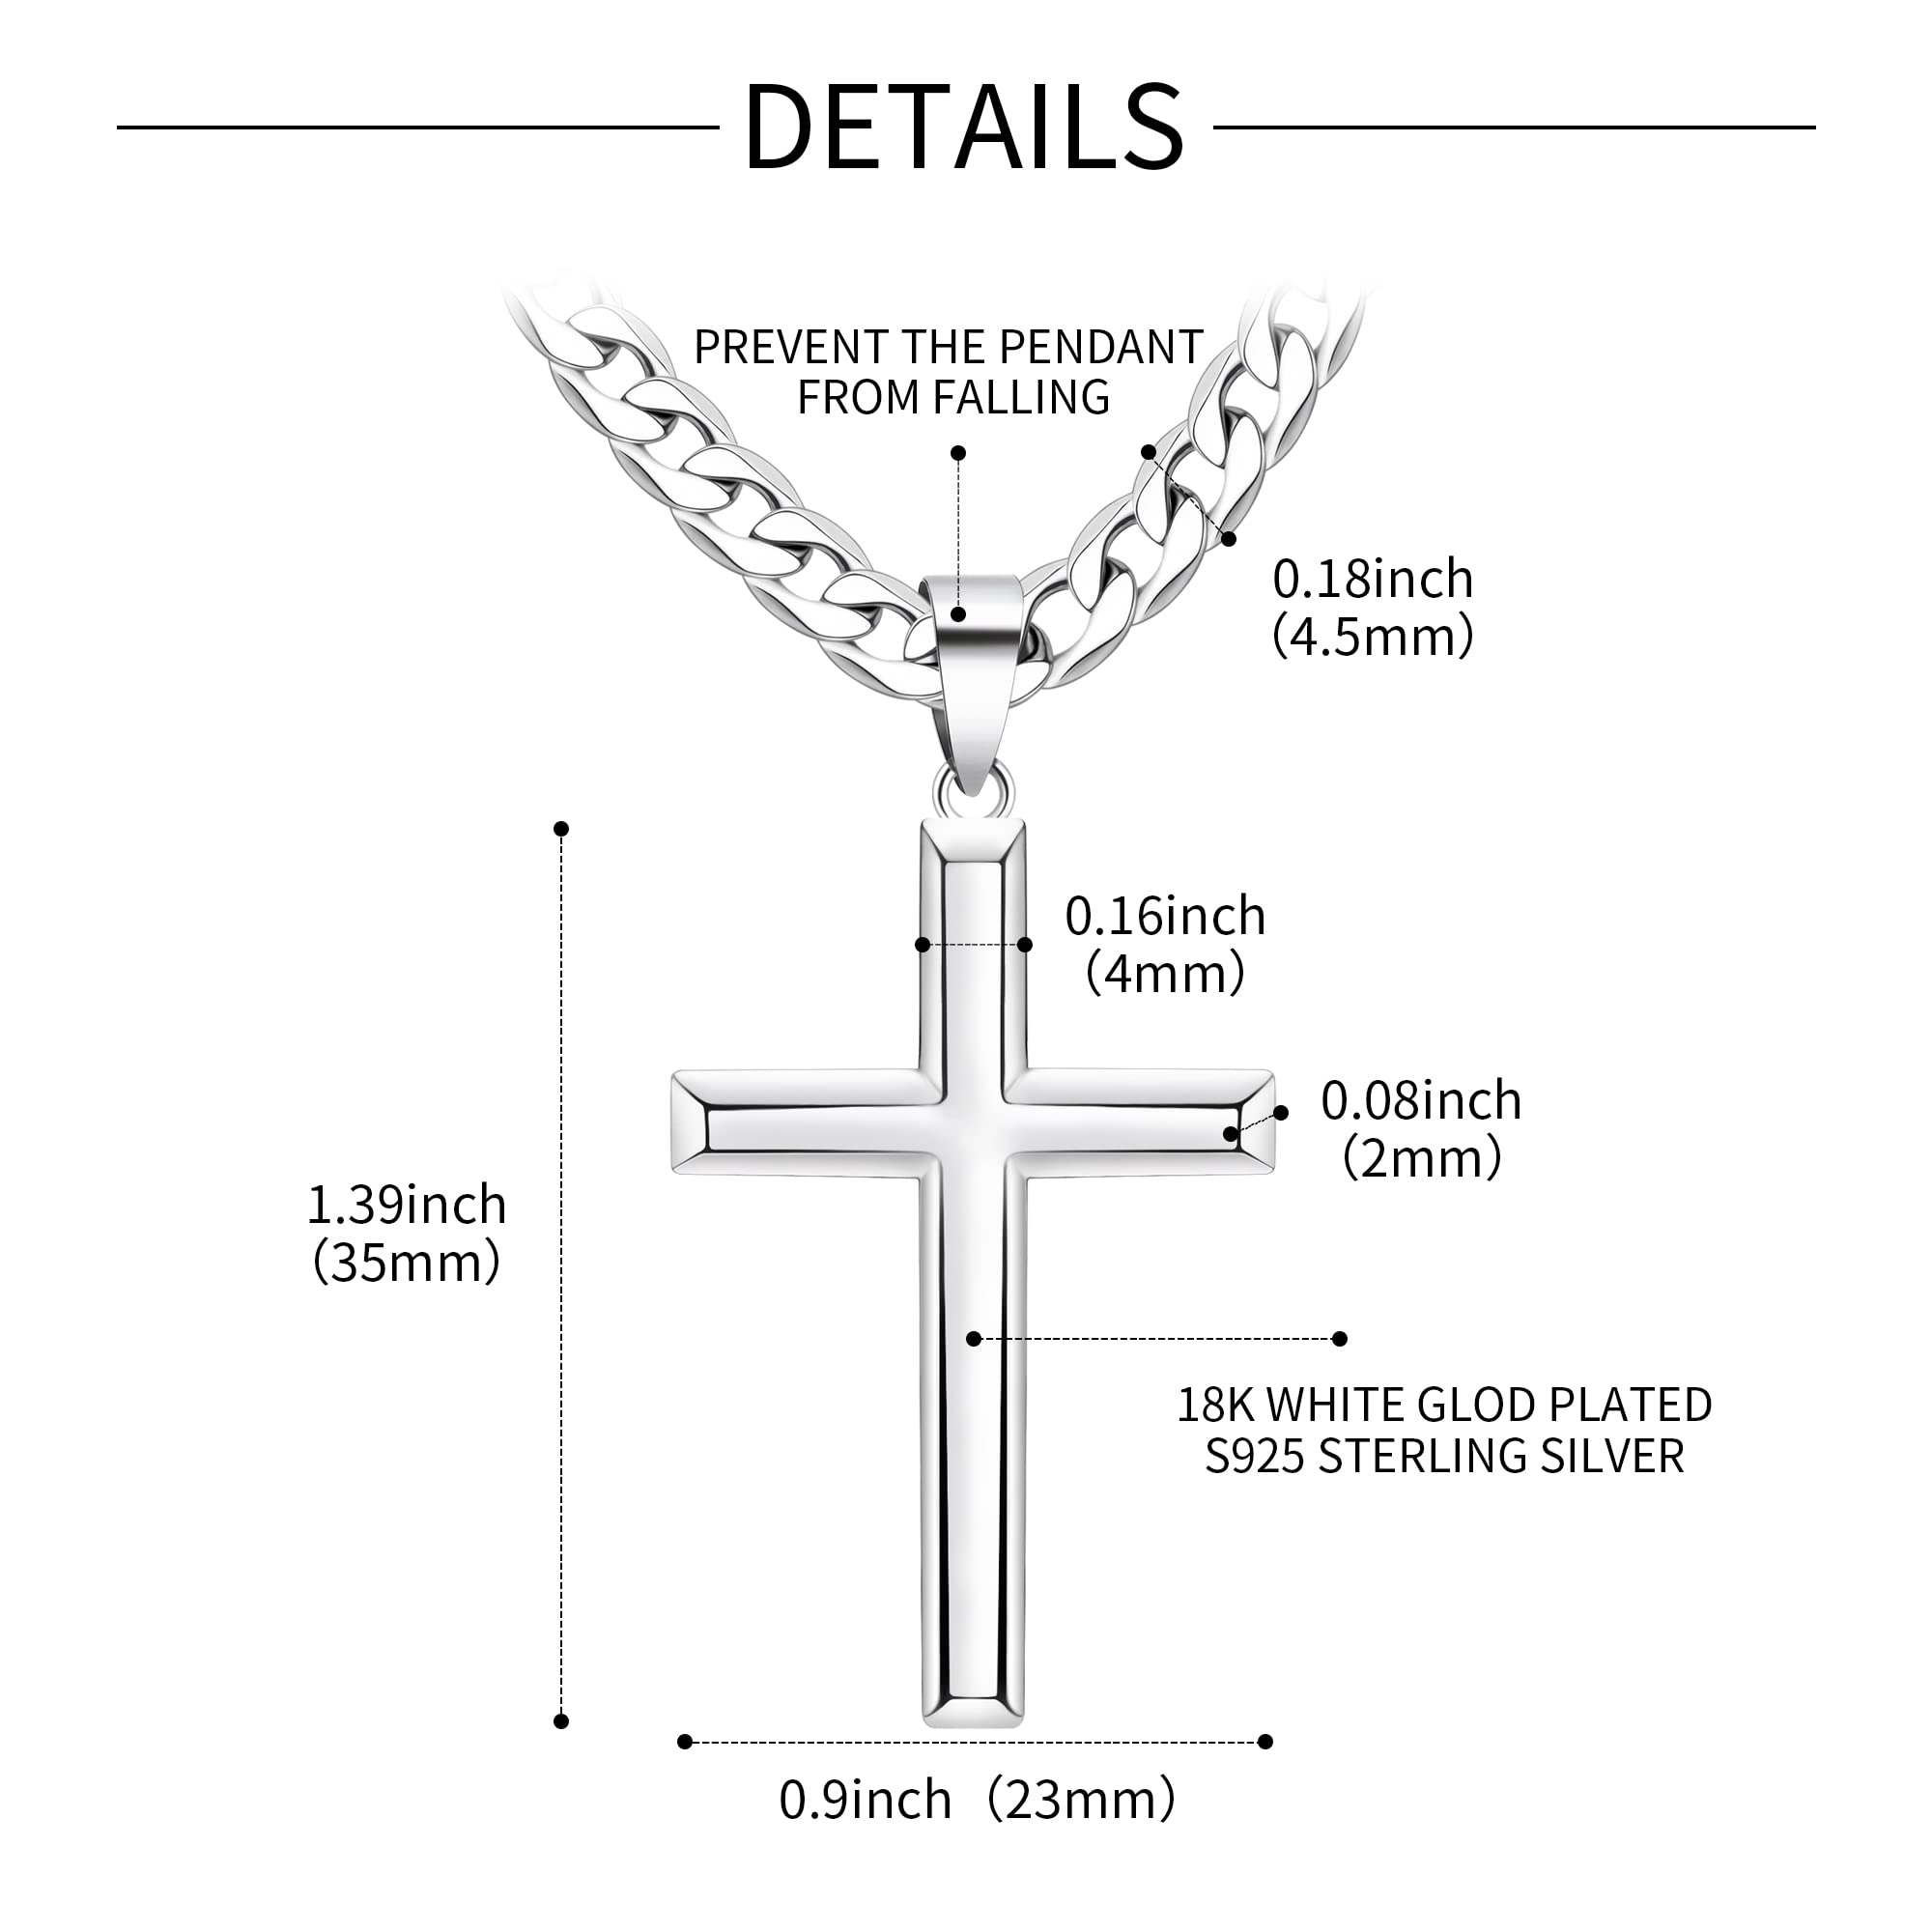 Cameido 925 Sterling Silver Cross Necklace for Men Women Stainless Steel Men's Diamond-Cut Solid Curb Cuban Link Chain Big Beveled Edge Crucifix Cross Pendant Necklace Highly Polished Silver Cross Pendant Necklace 16-28 Inches